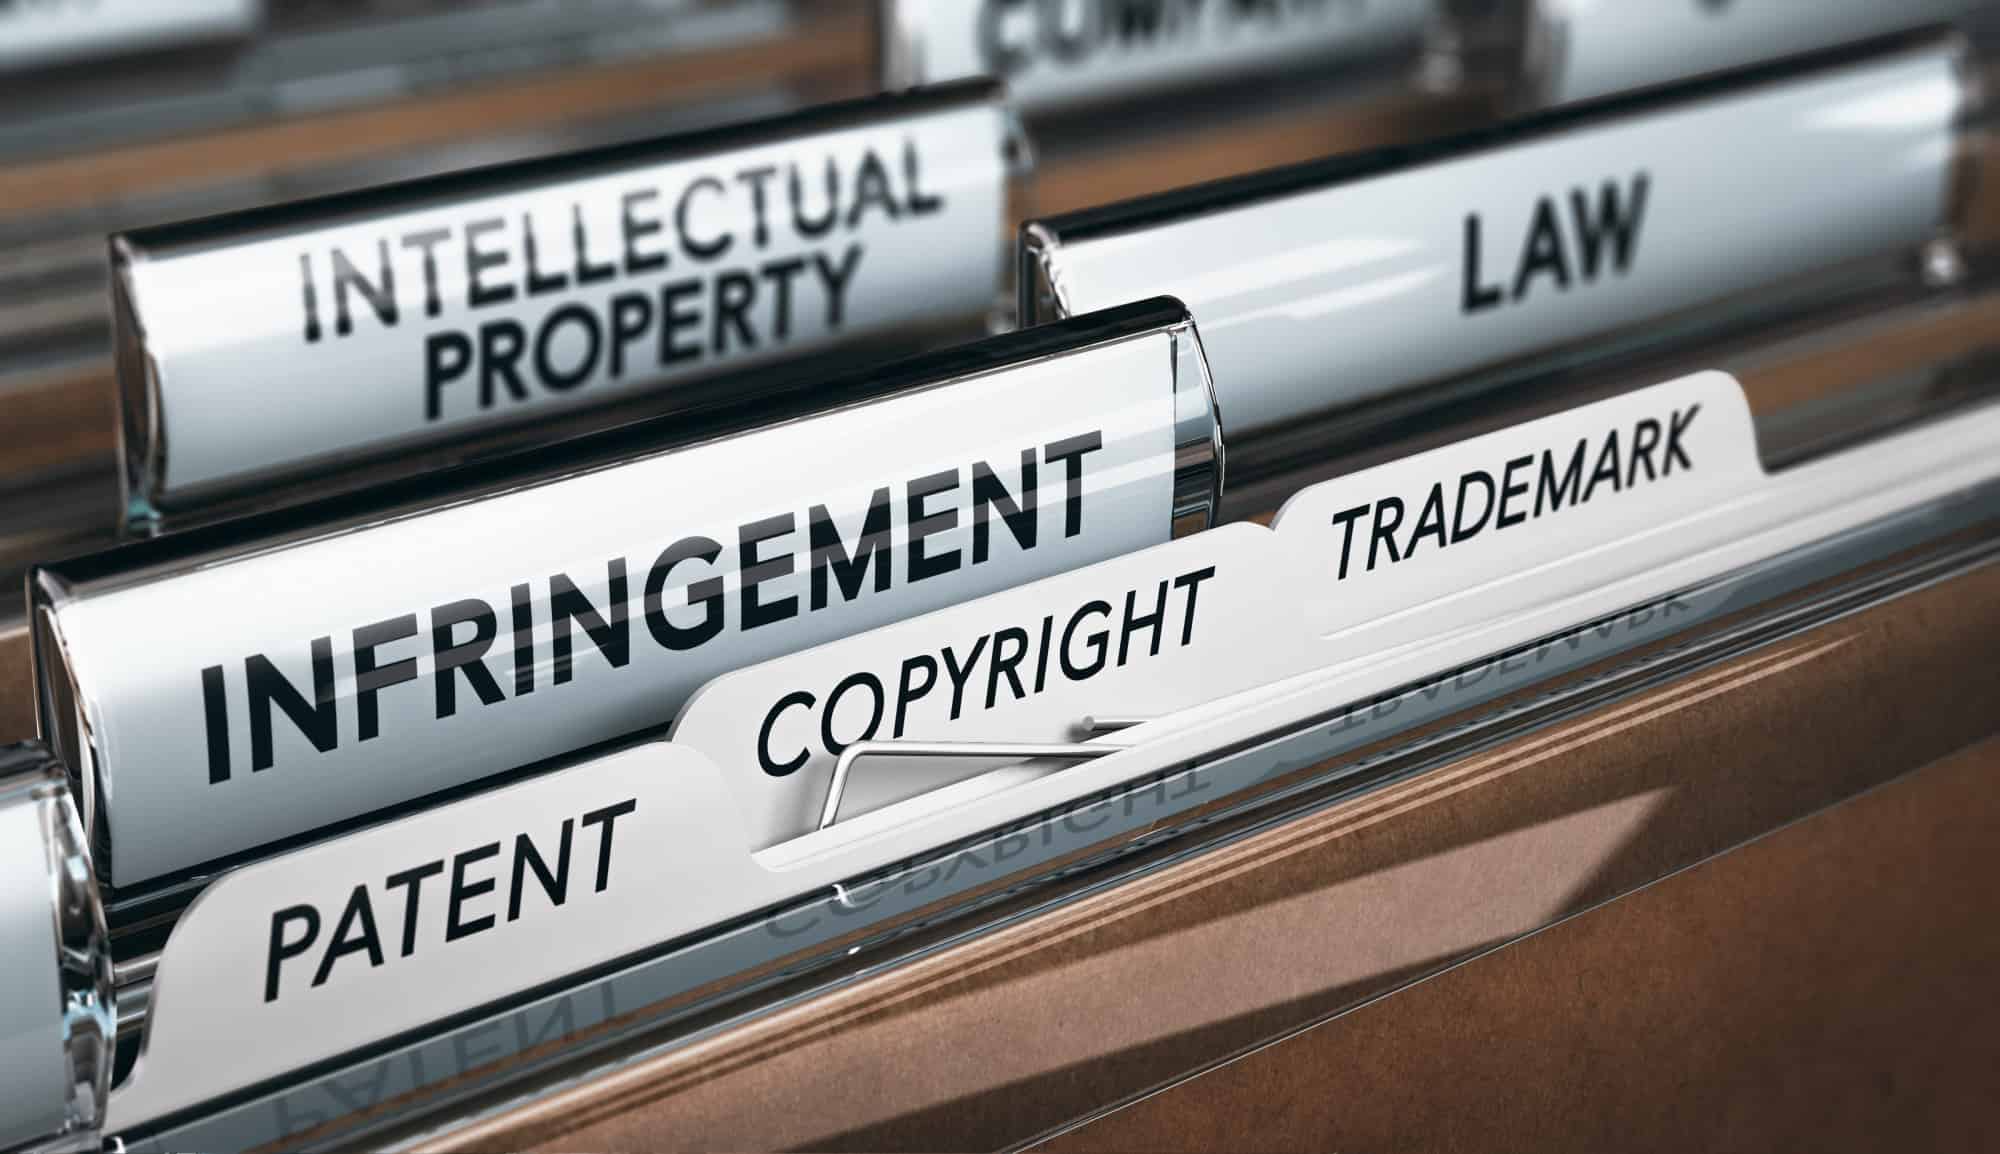 Intellectual Property Rights, Copyright, Patent or Trademark Infringement